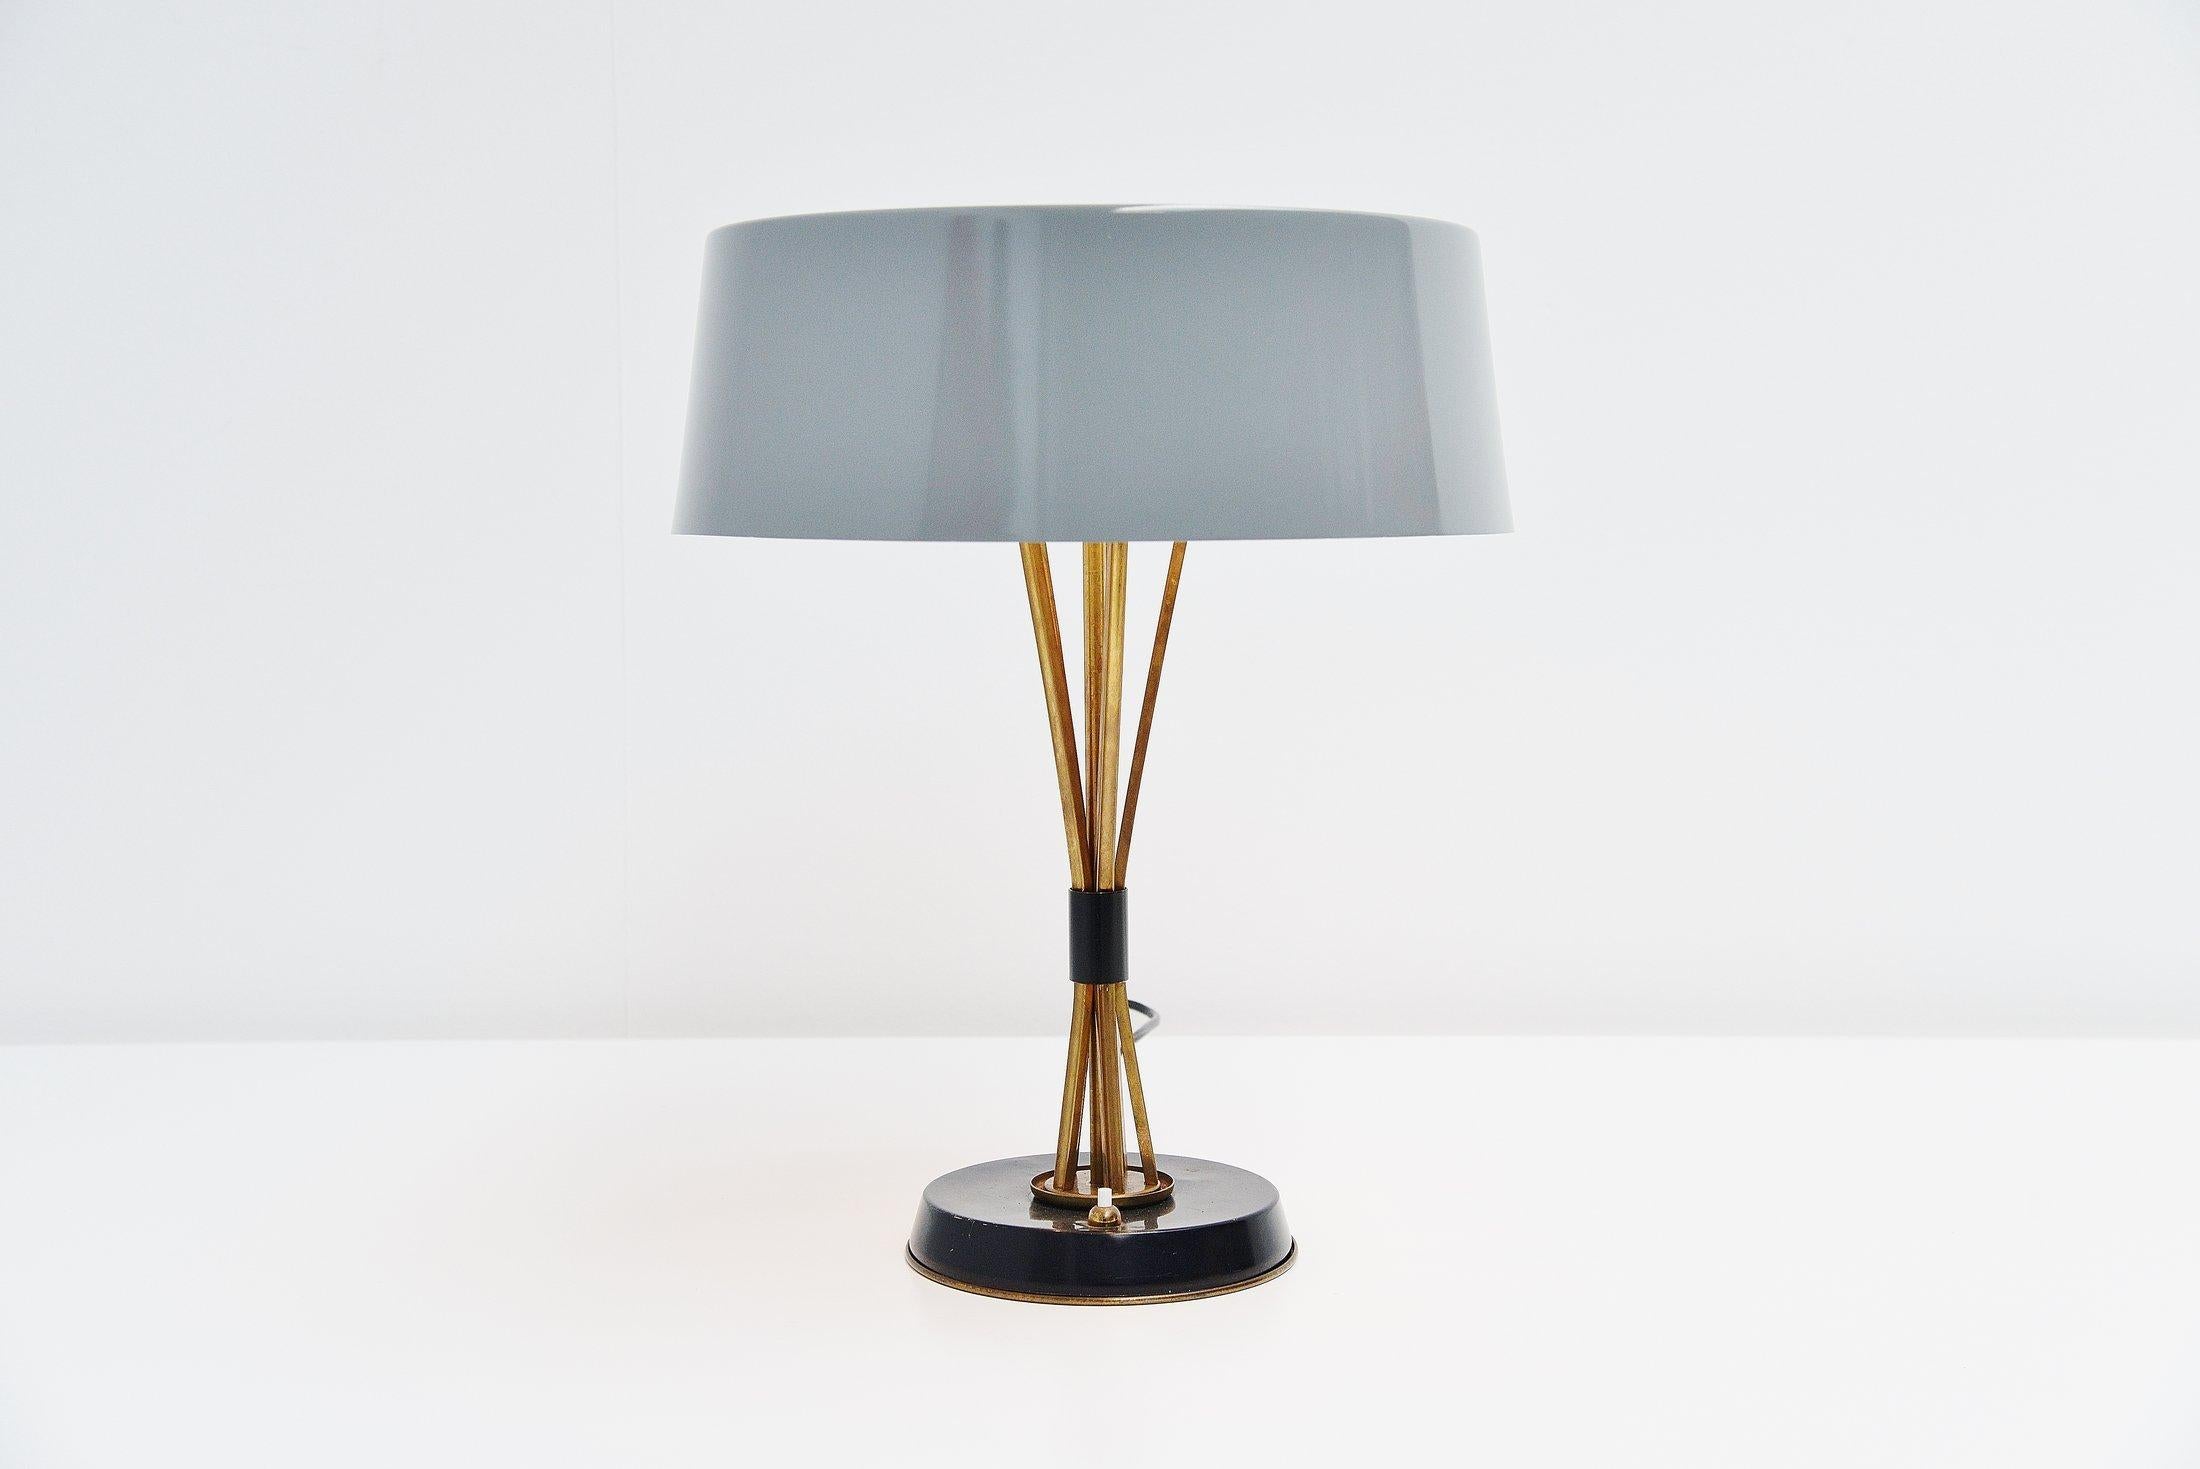 Very nice tiltable table lamp designed by Oscar Torlasco and manufactured by Lumi, Italy, 1960. This lamp has many beautiful hidden details and quality is written all over. Torlasco was for me the master of surprises, when a lamp looks simple, it